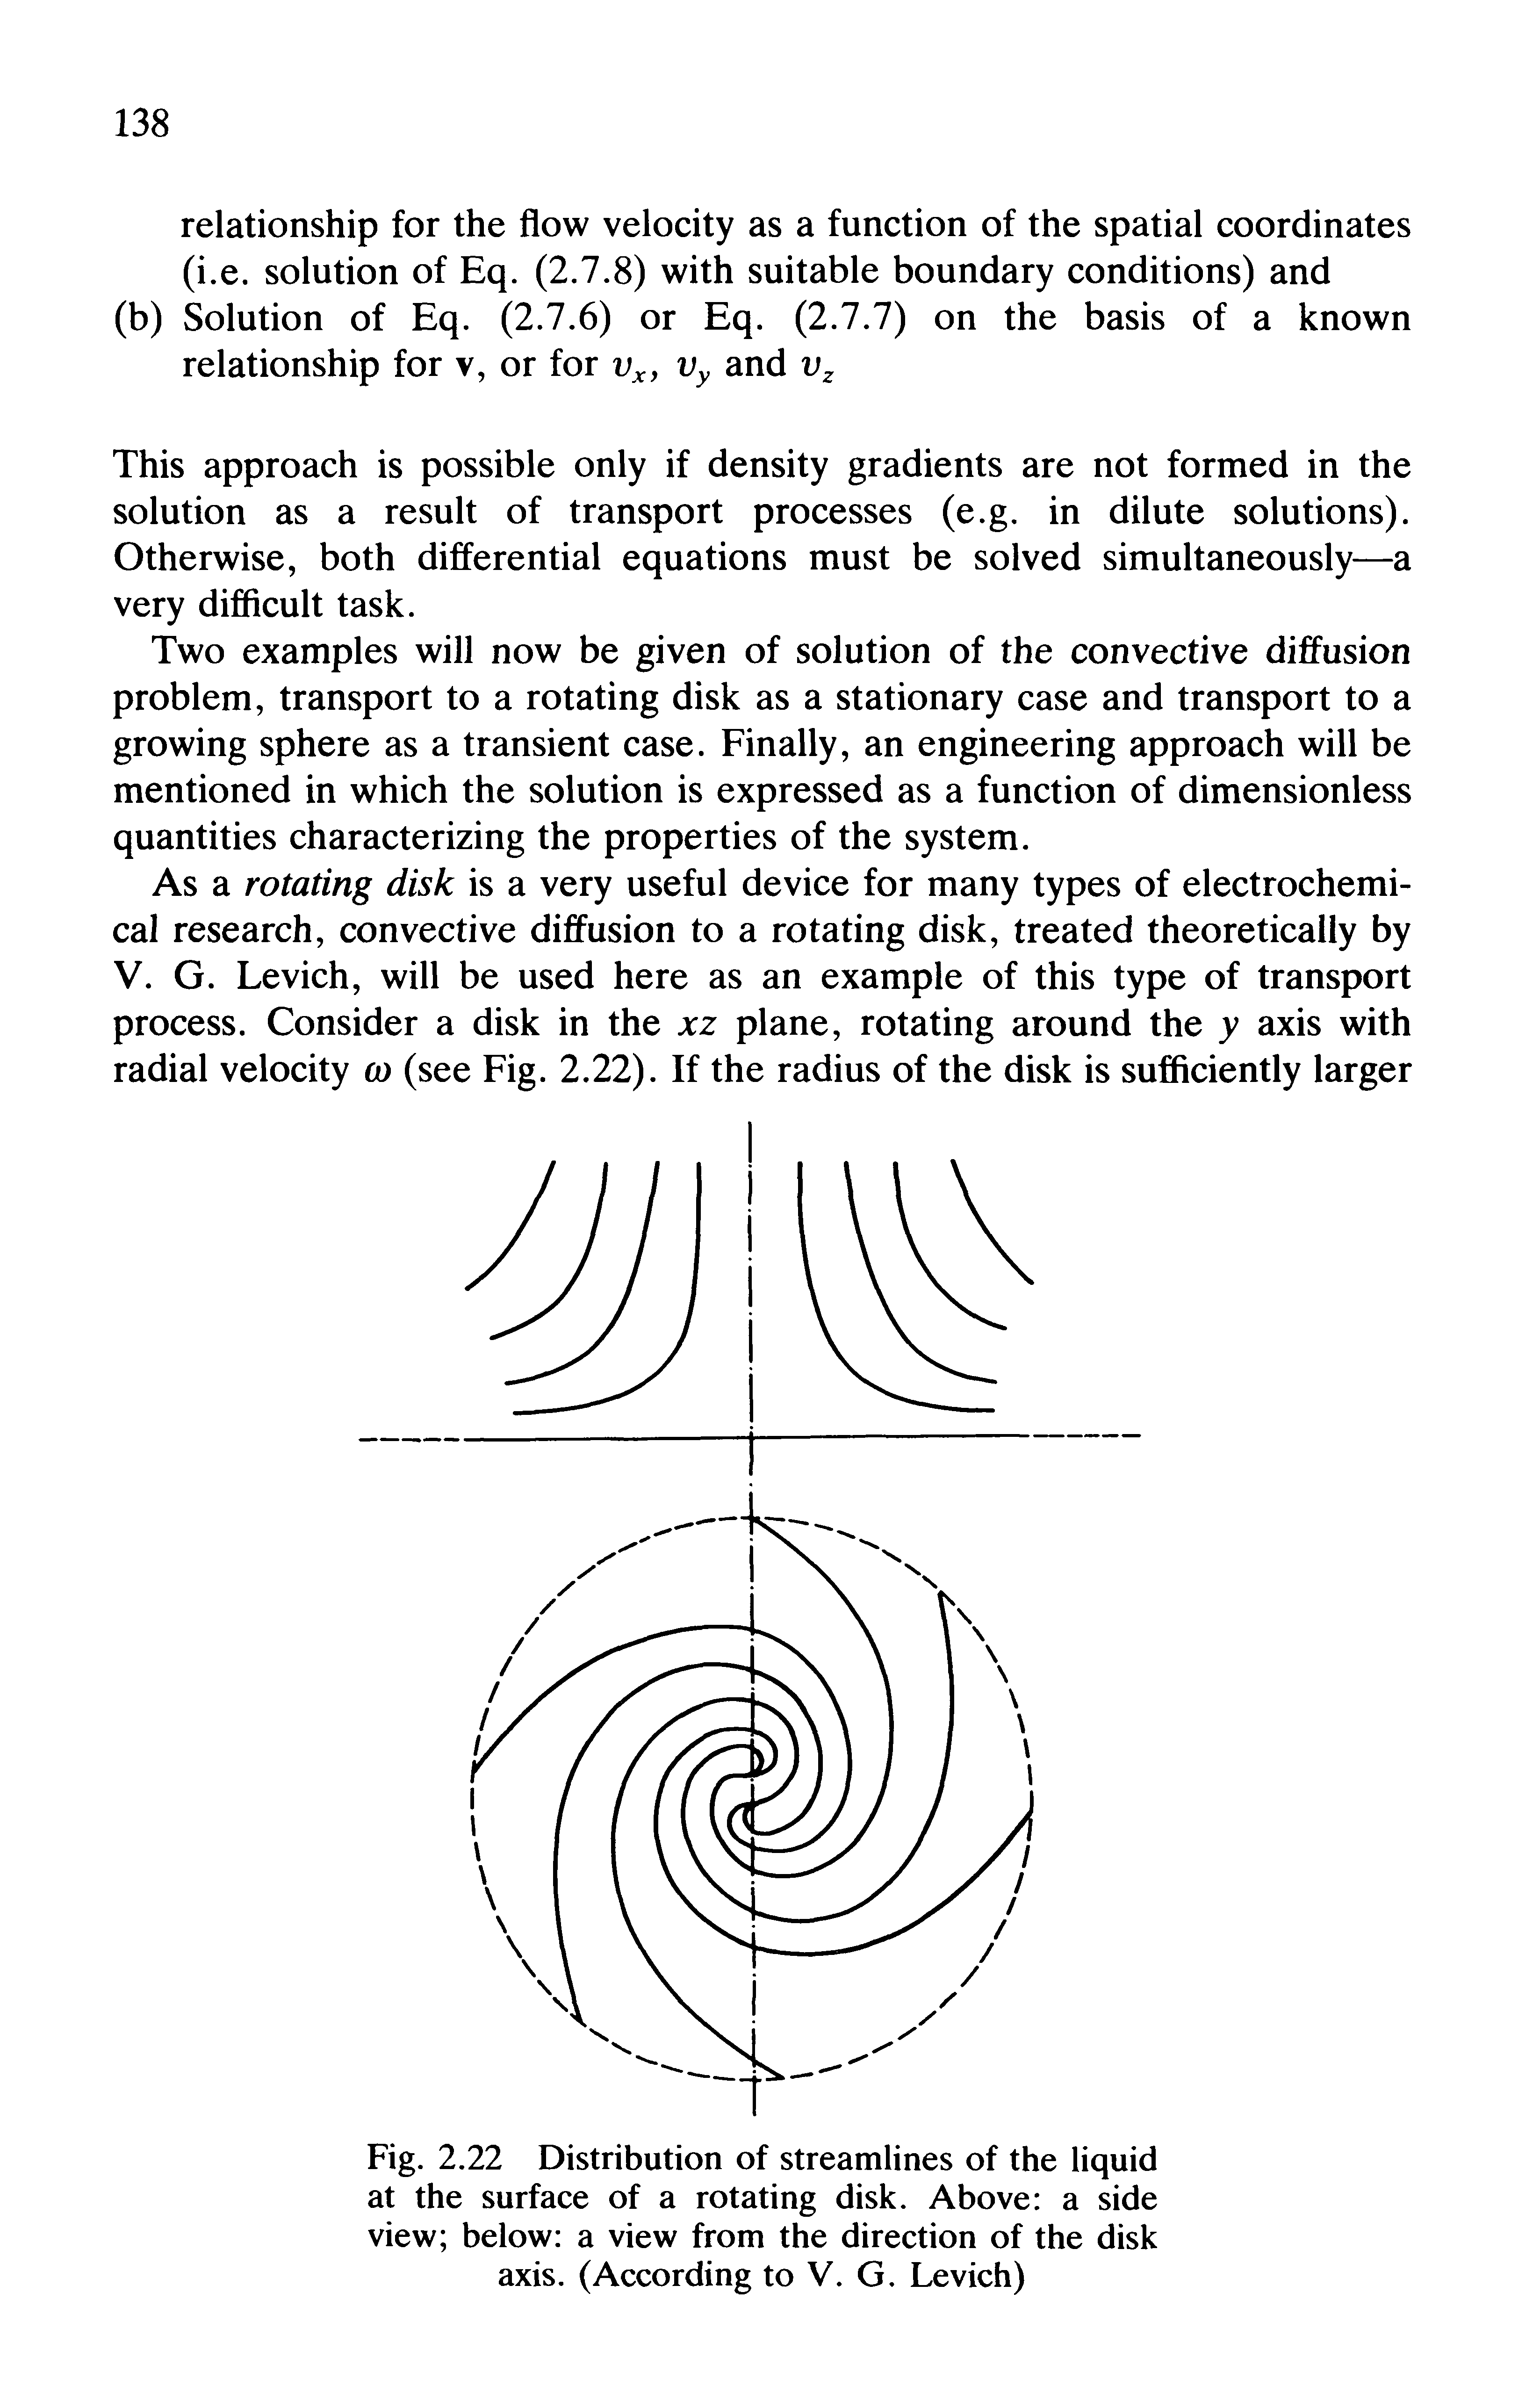 Fig. 2.22 Distribution of streamlines of the liquid at the surface of a rotating disk. Above a side view below a view from the direction of the disk axis. (According to V. G. Levich)...